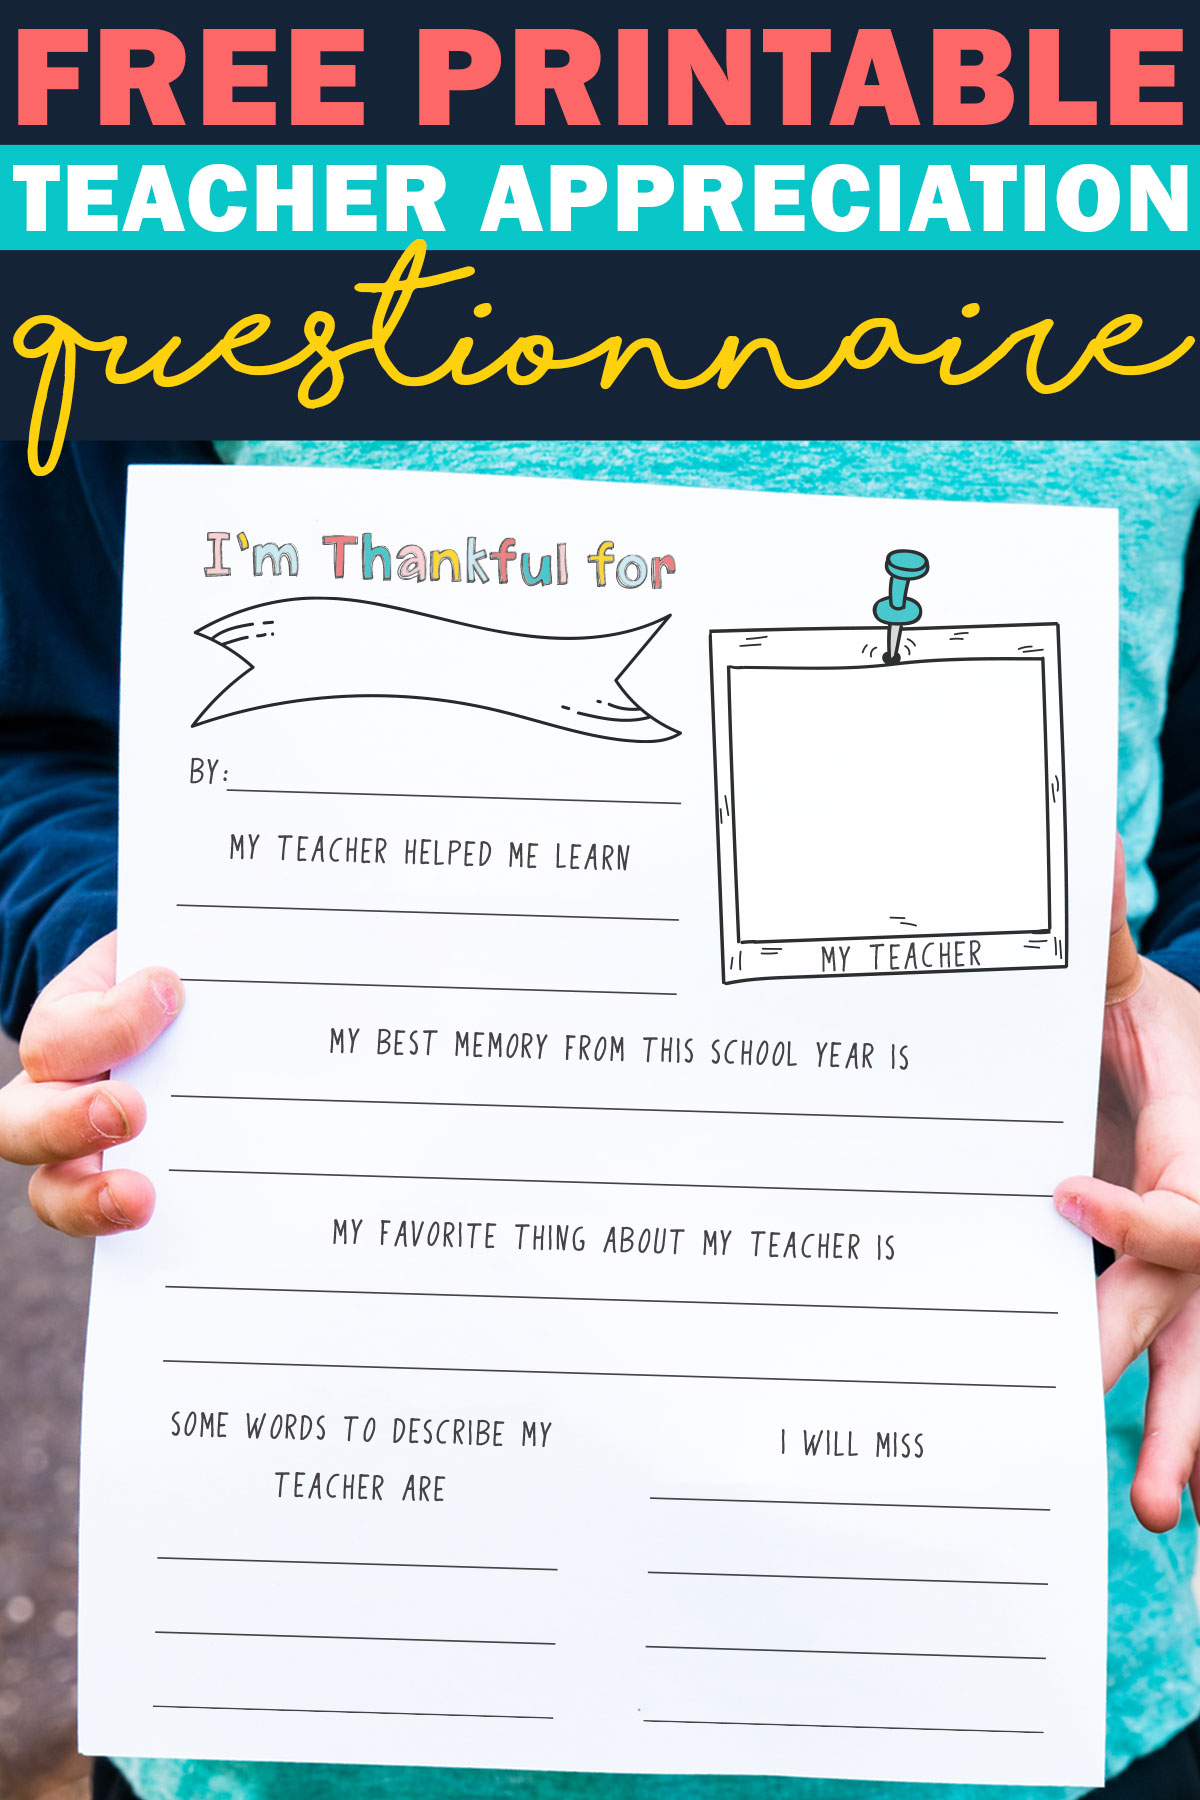 At the top it says free printable teacher appreciation questionnaire. Below that is a copy of the questionnaire.